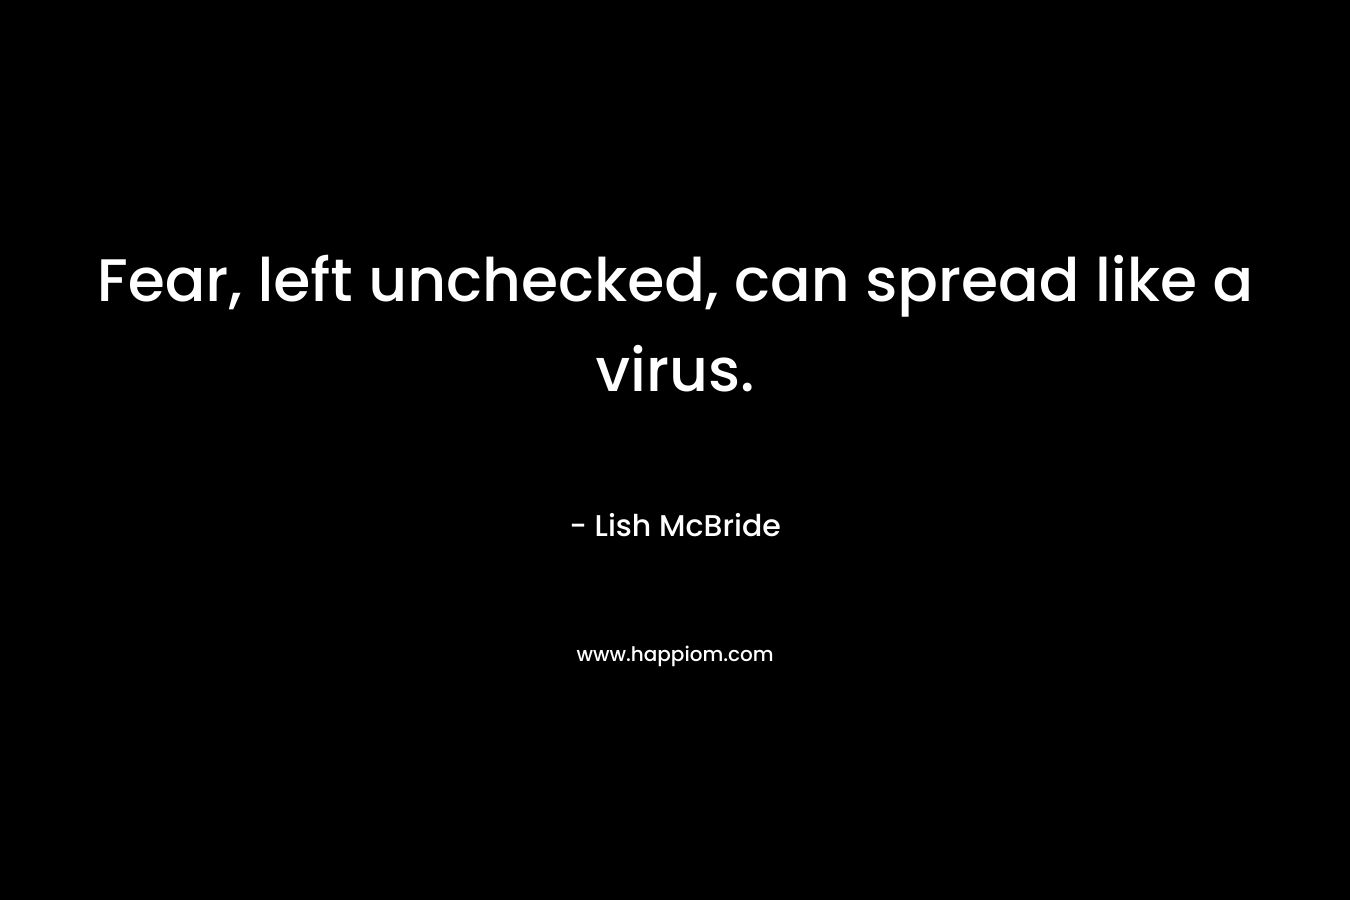 Fear, left unchecked, can spread like a virus. – Lish McBride